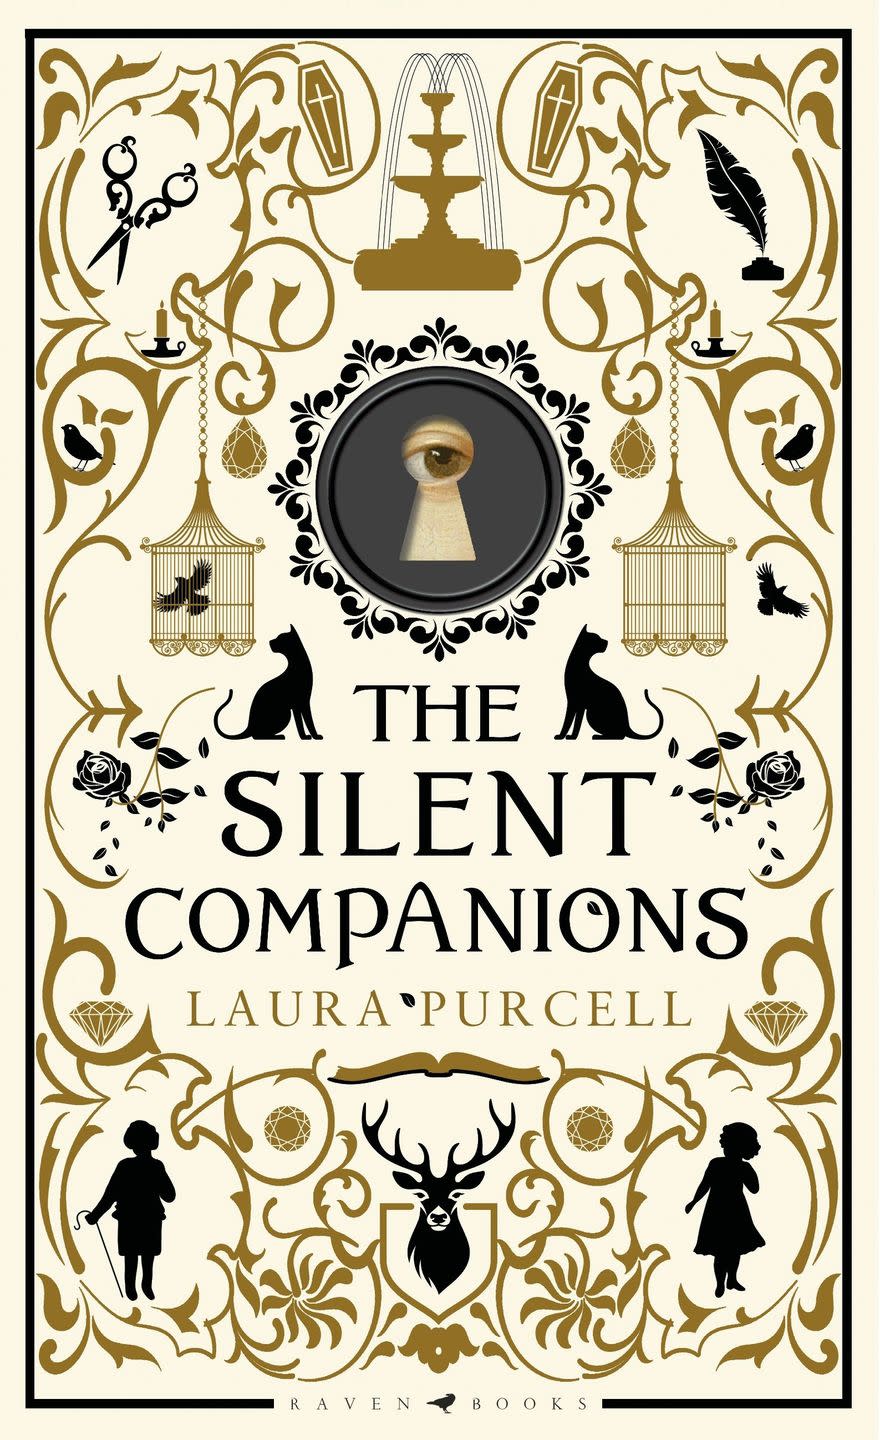 'The Silent Companions' by Laura Purcell